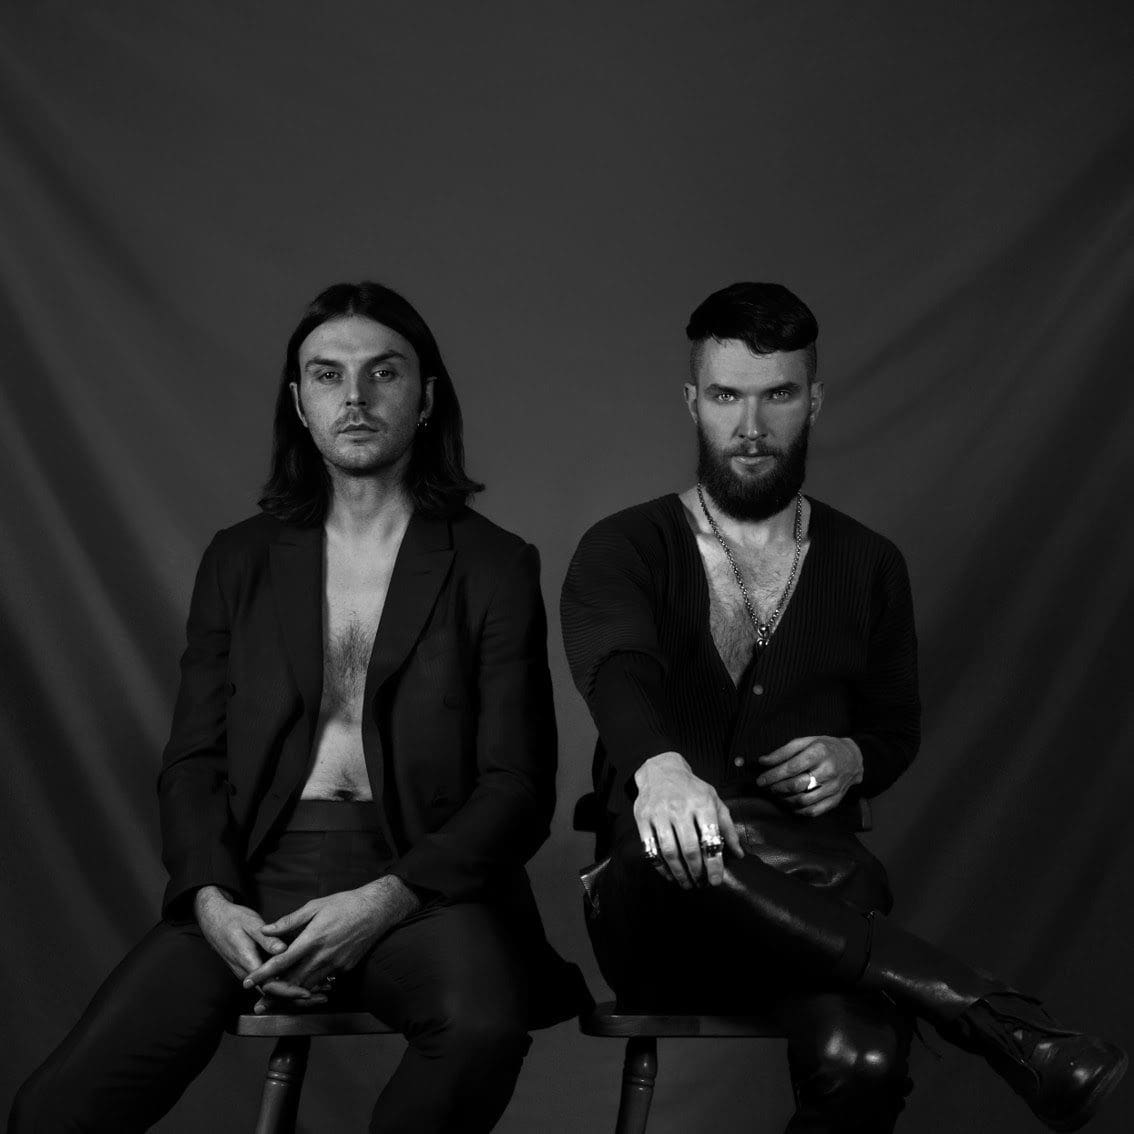 UK synthpop duo Hurts to release new album 'Faith' on September 4th